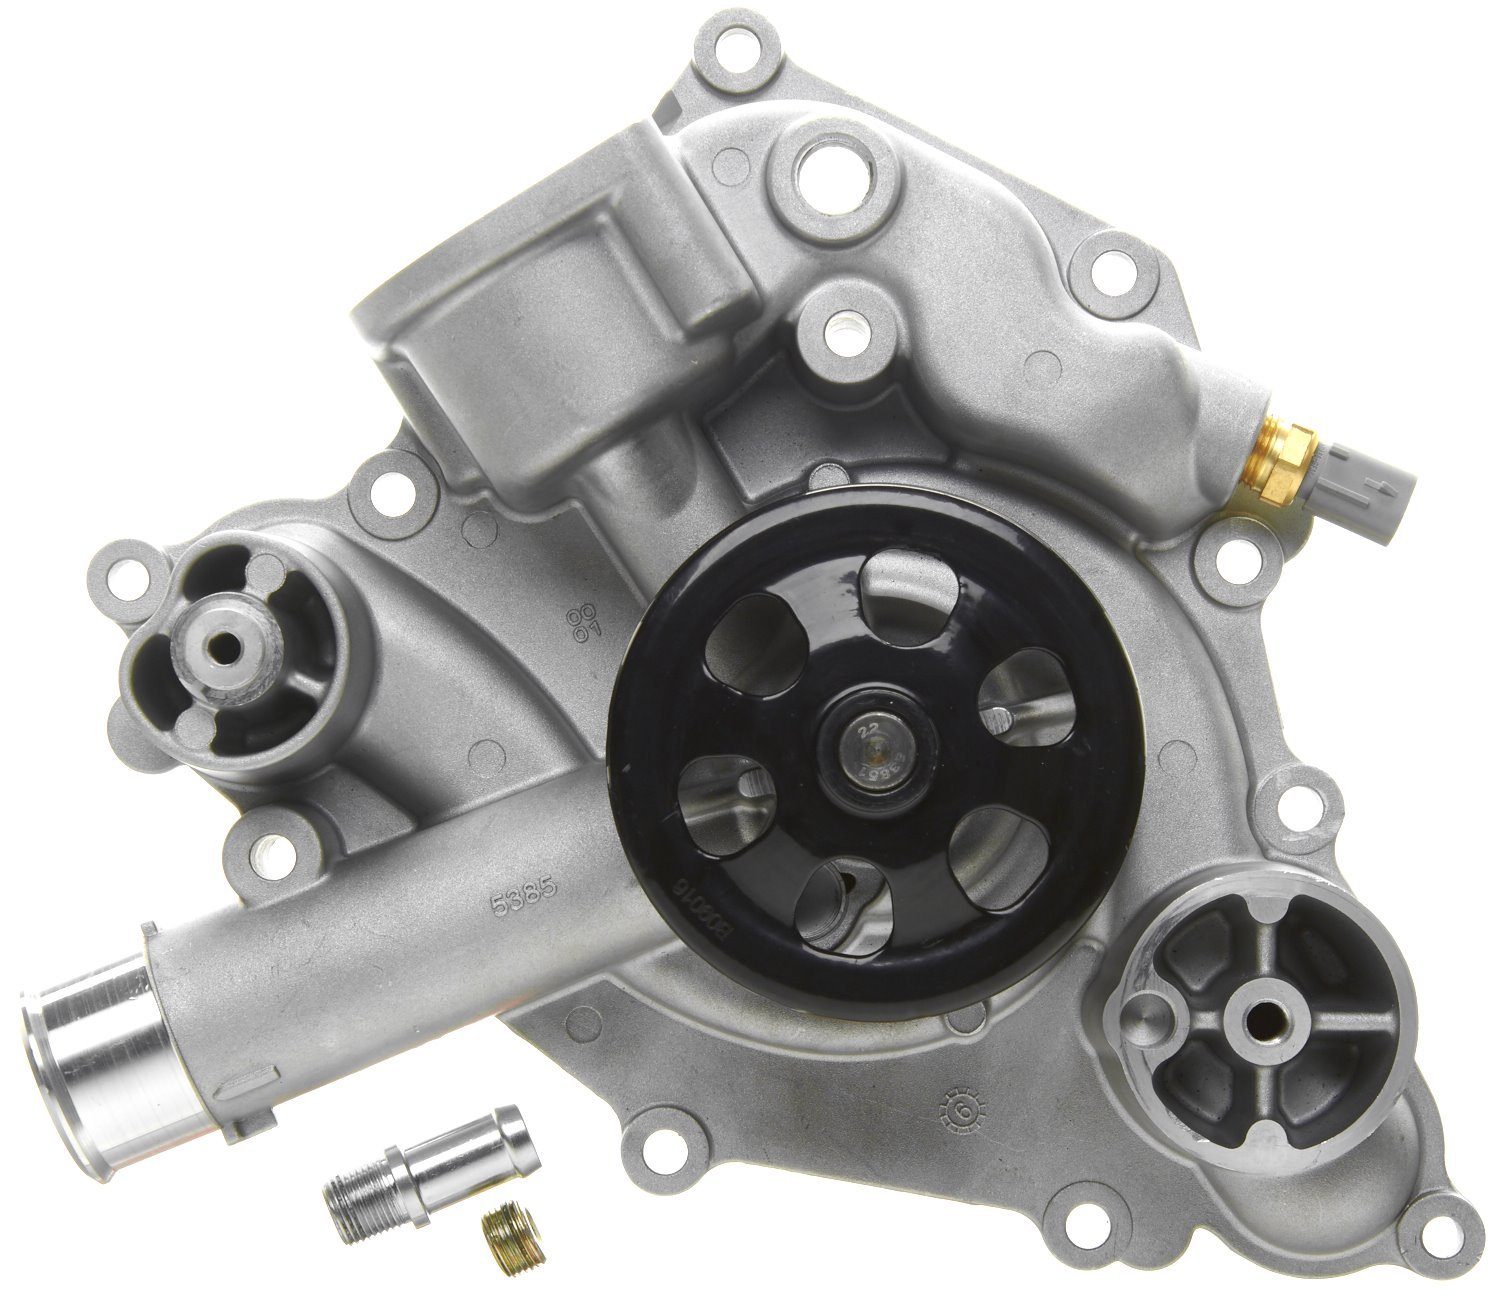 Water Pump [Light Duty] for Select 2012-2021 Chrysler, Dodge, Jeep